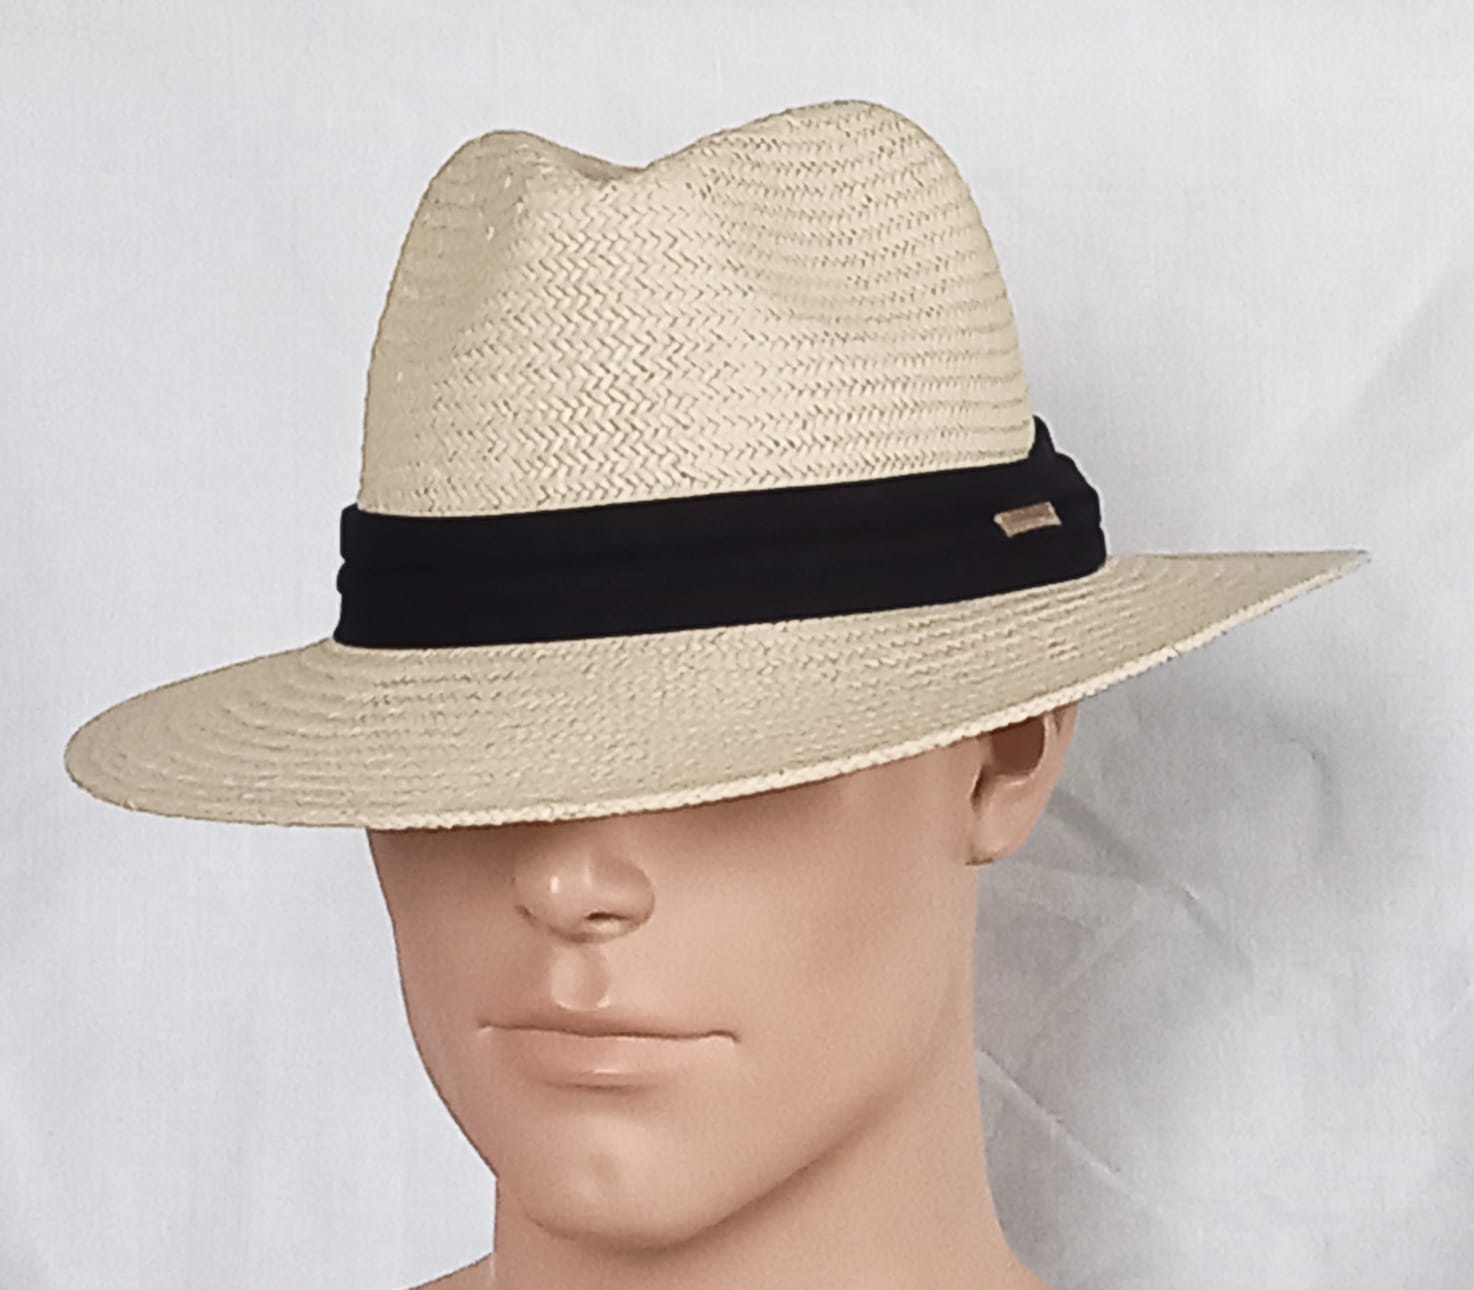 Natural Straw Panama Sun Hat Summer Cap - Online Style Hats Panama UK, Buy  Winter Hats, Black Trilby, Beanie Hat Mens, Women's Fashion Scarves for  Sale